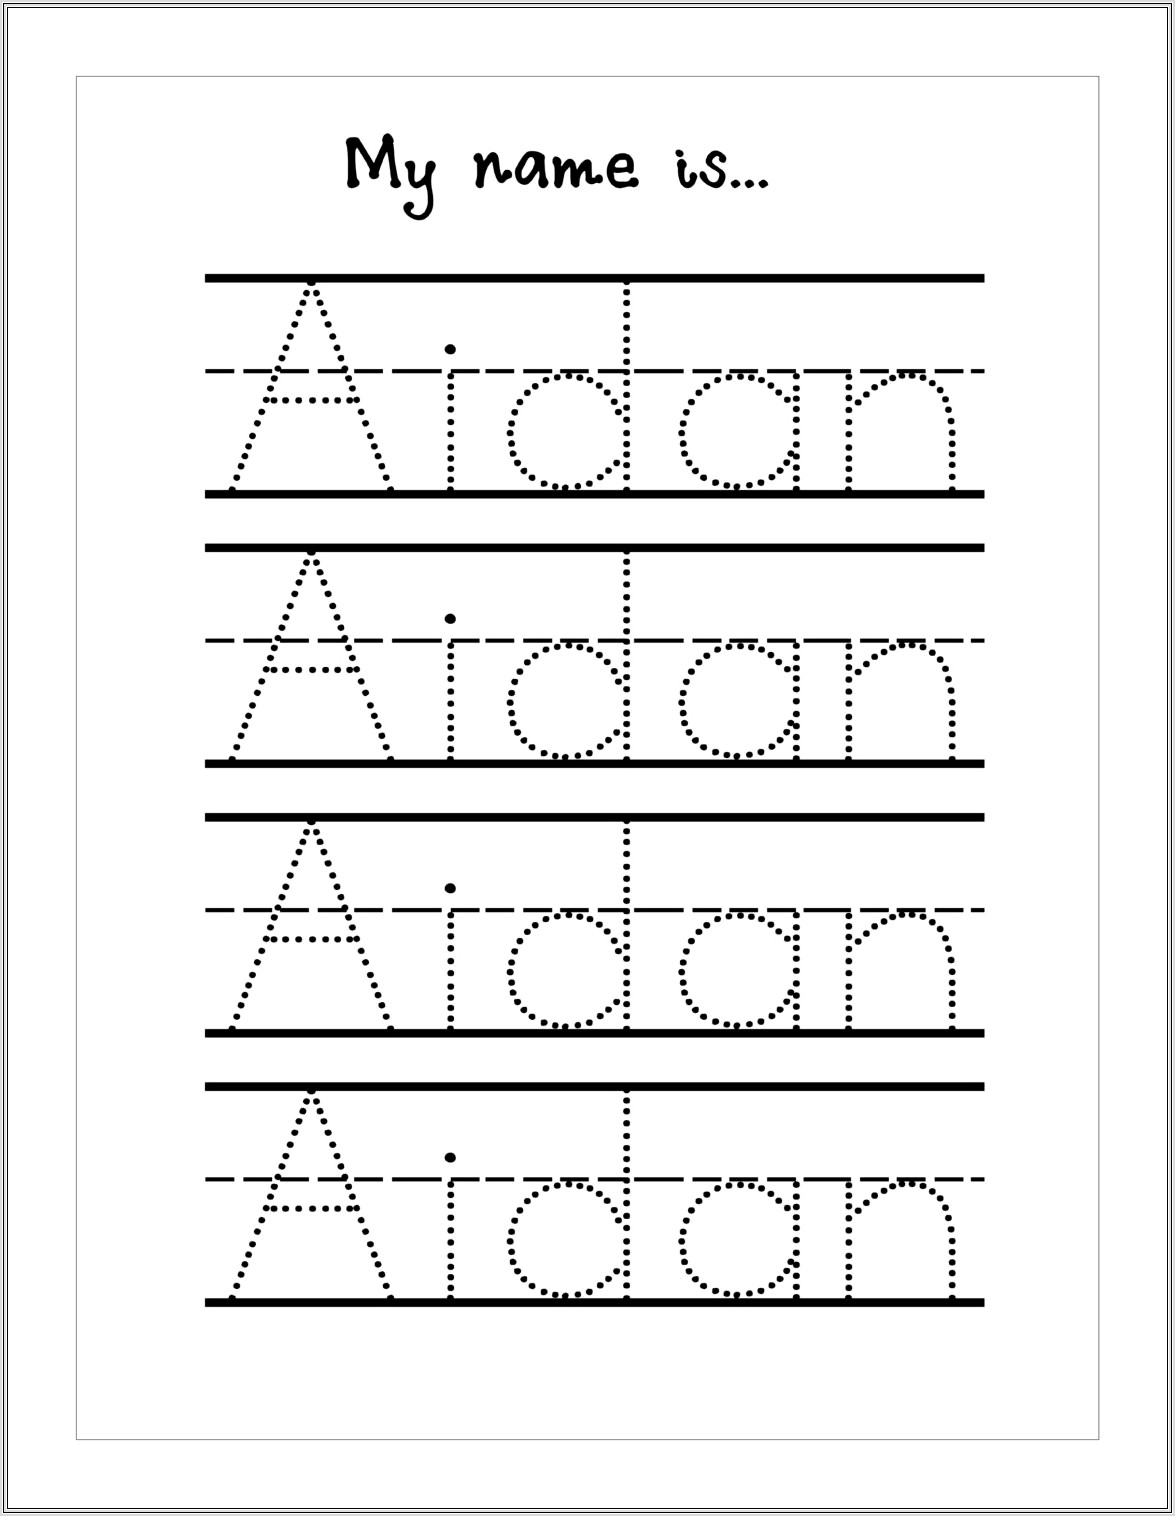 How To Practice Writing Your Name Worksheet